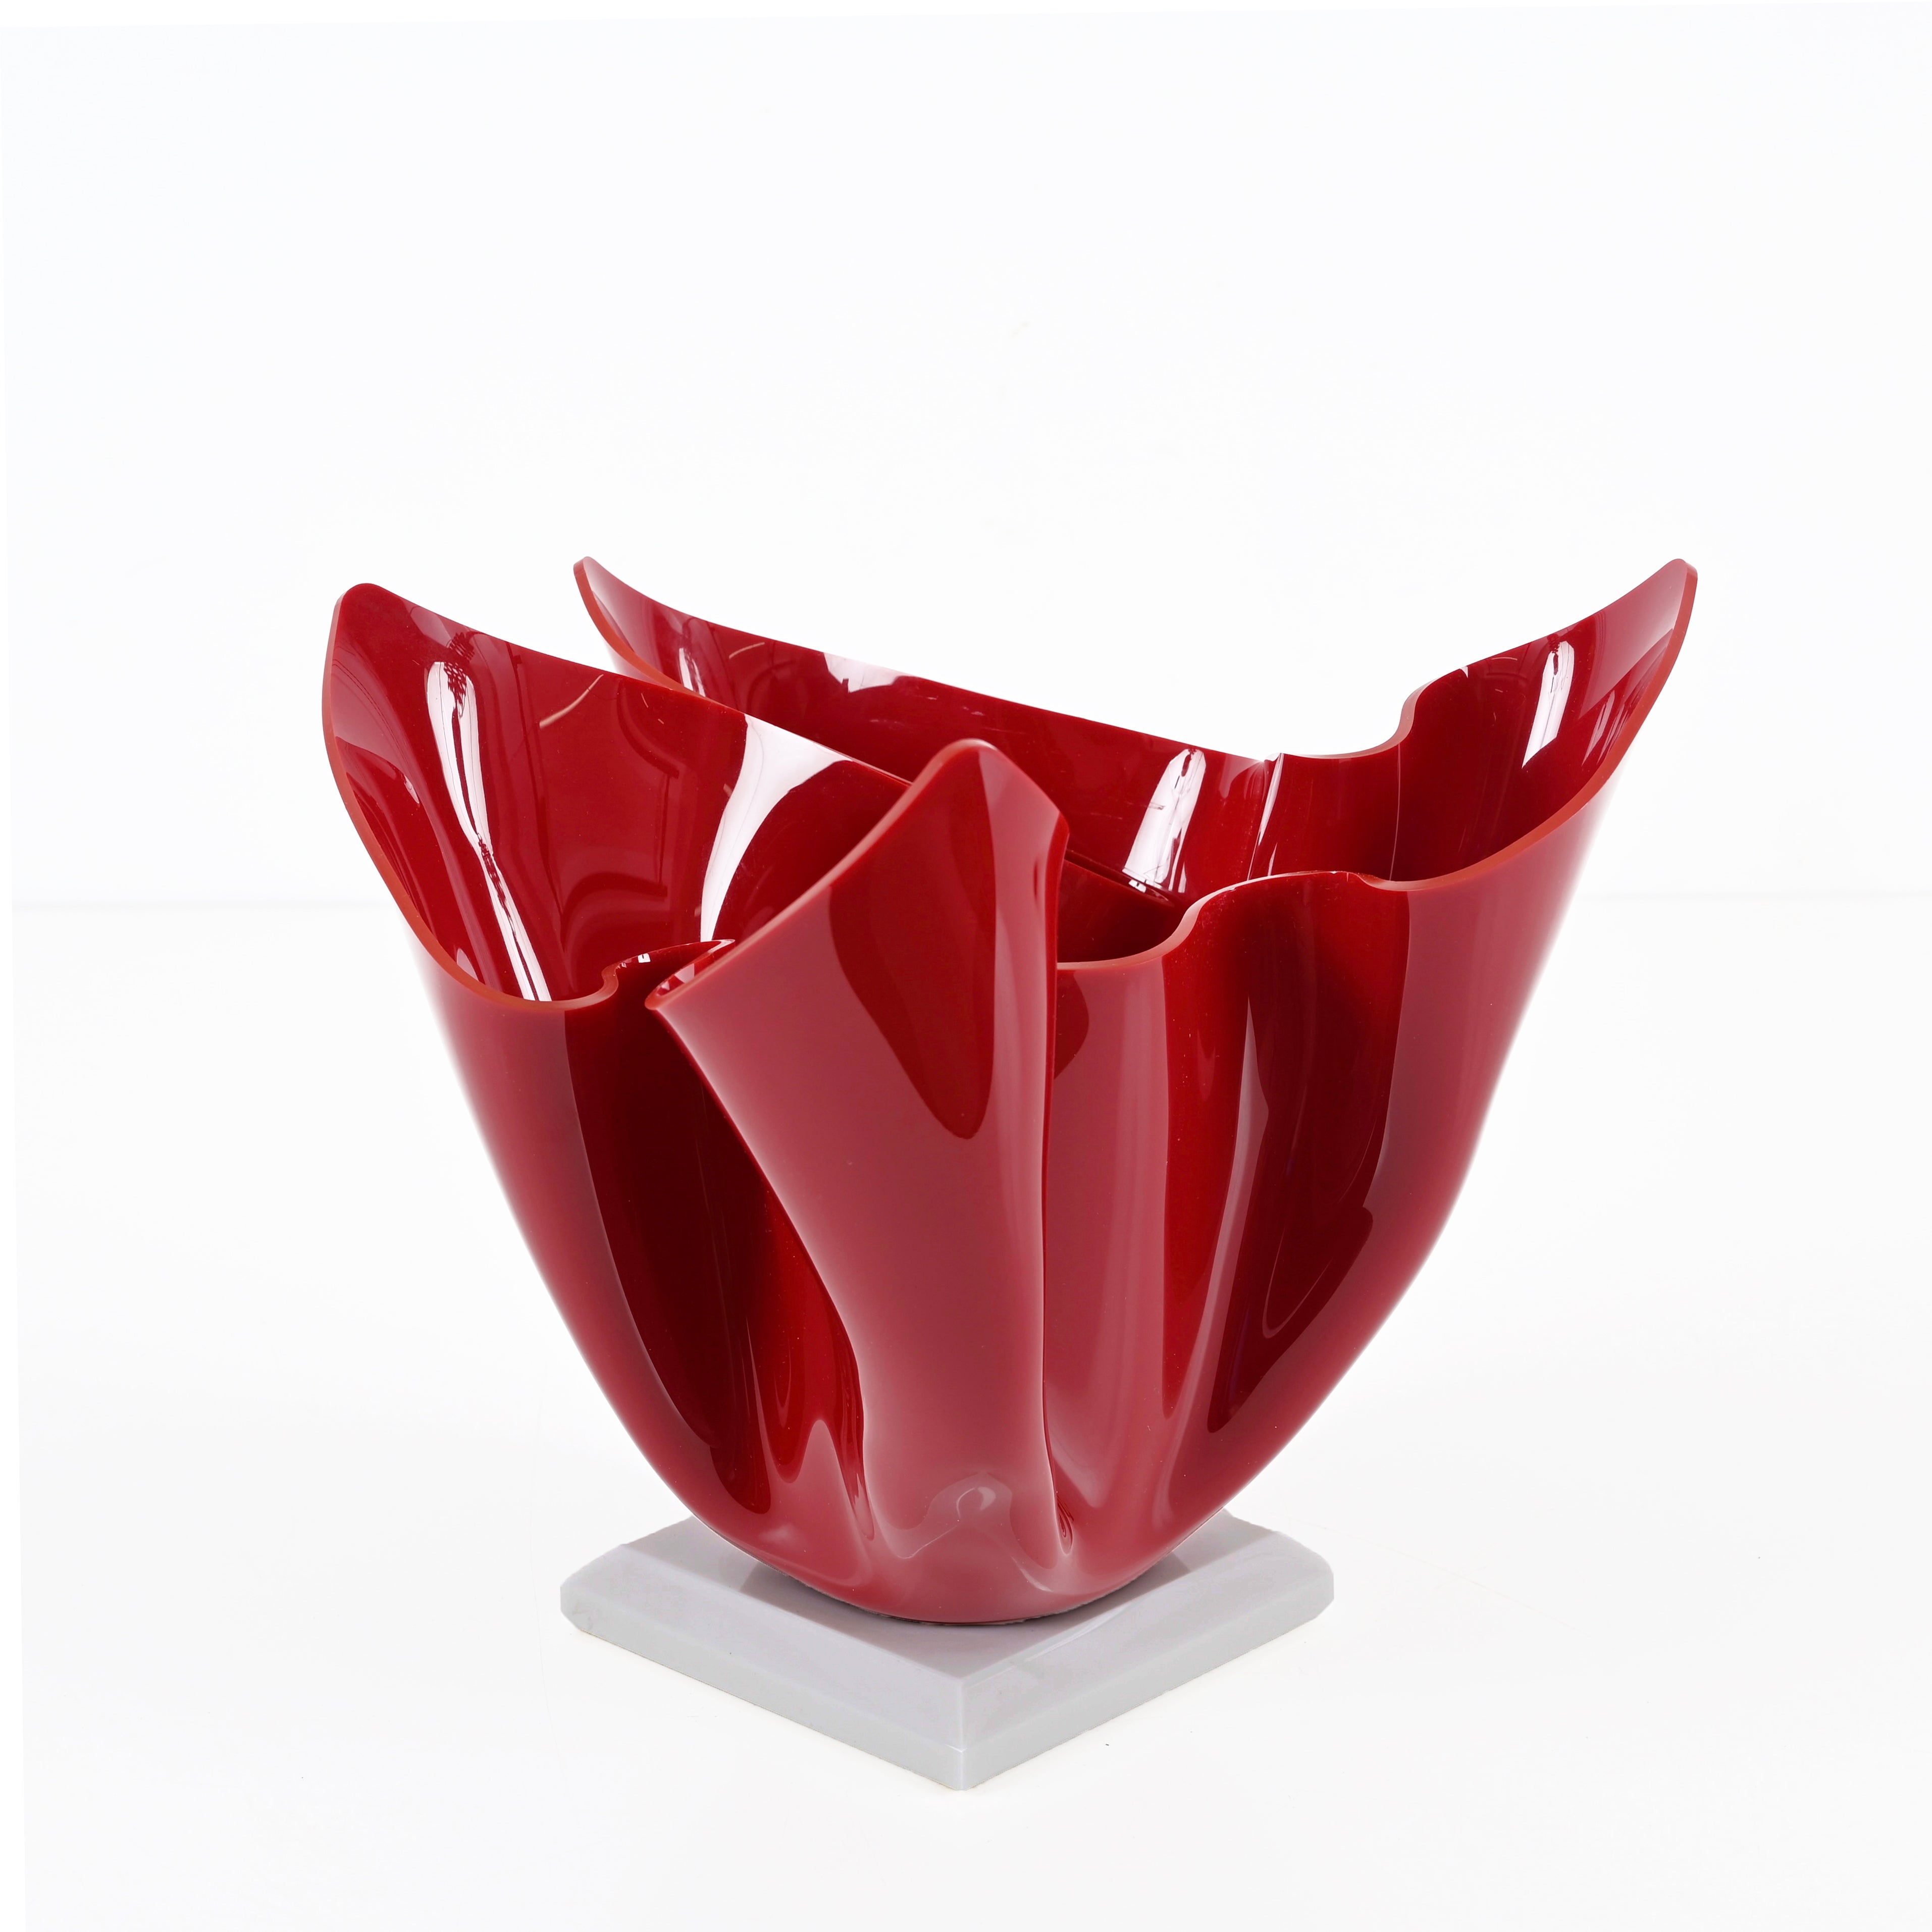 Mid-Century Burgundy Lucite Italian "Napkin" Centerpiece or Serving Bowl, 1980s For Sale